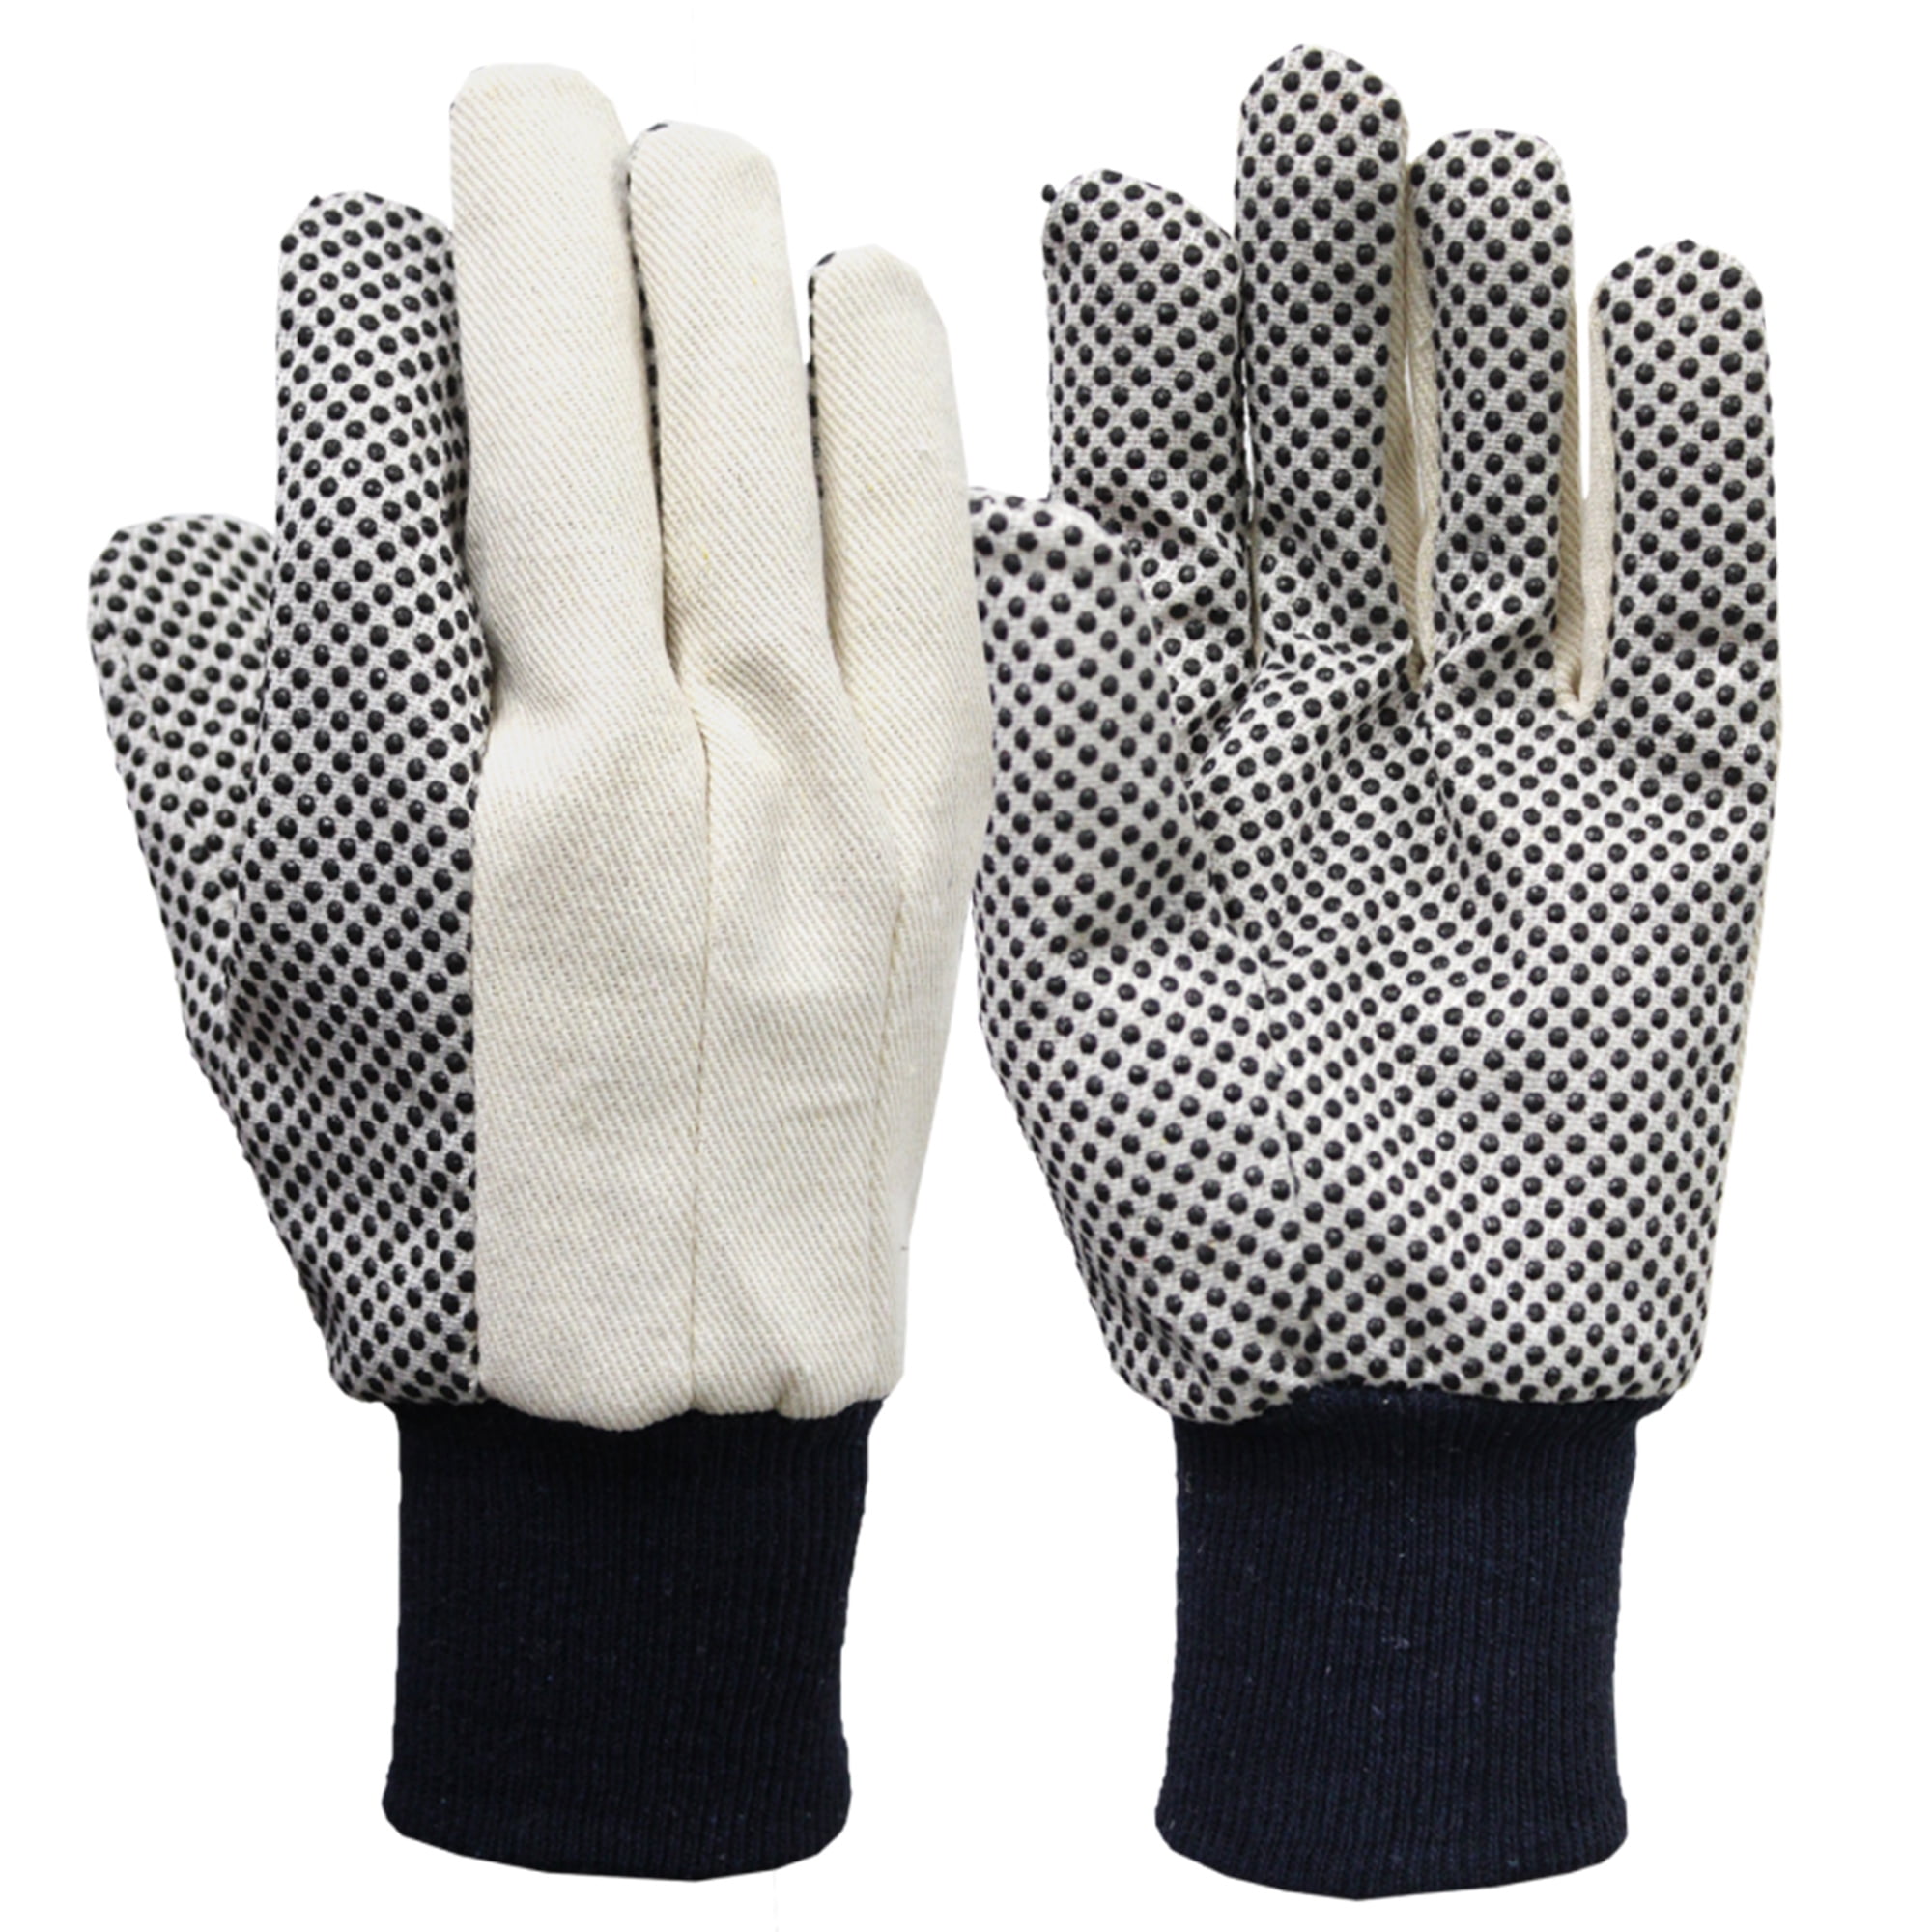 Expert Gardeners Canvas Gloves Two Pairs With Grip Dots Size M 